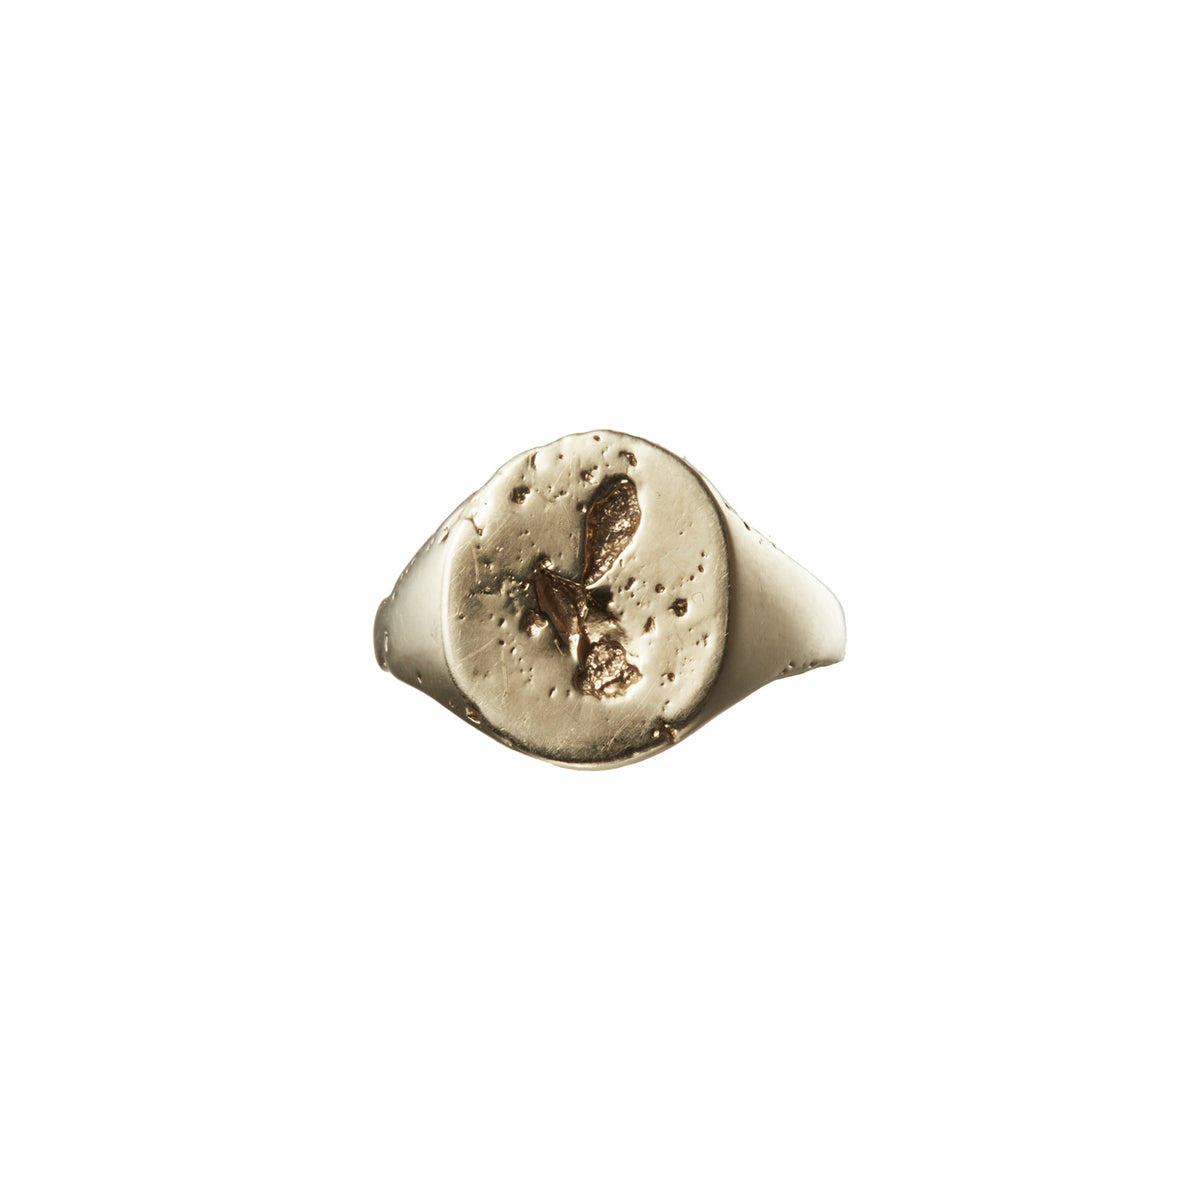 G&F Co.- OVAL SIGNET RING _ SILVER 925 & 18 GOLD COATING